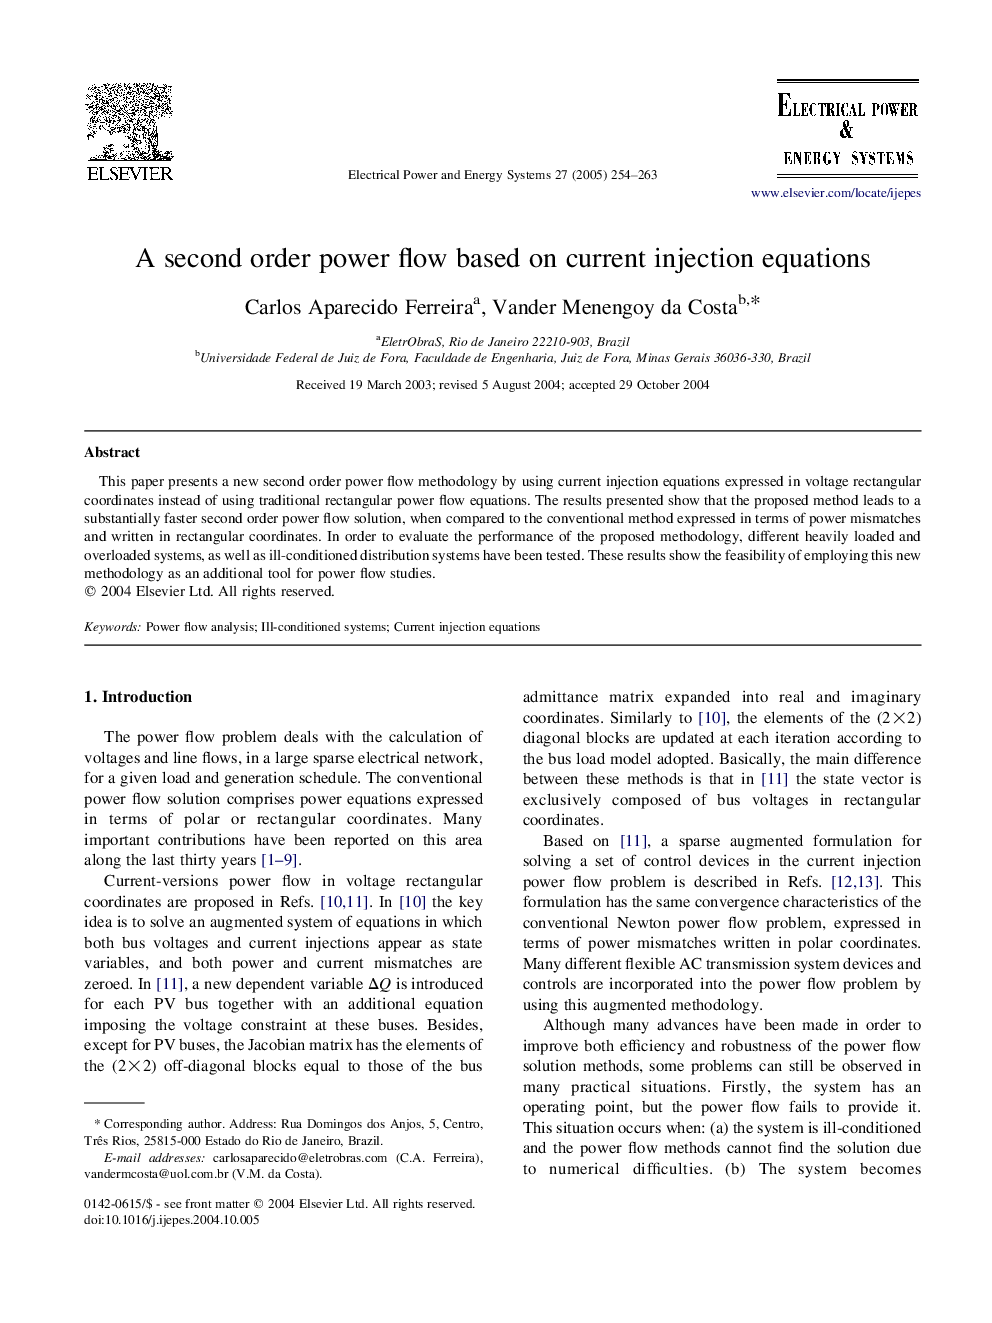 A second order power flow based on current injection equations